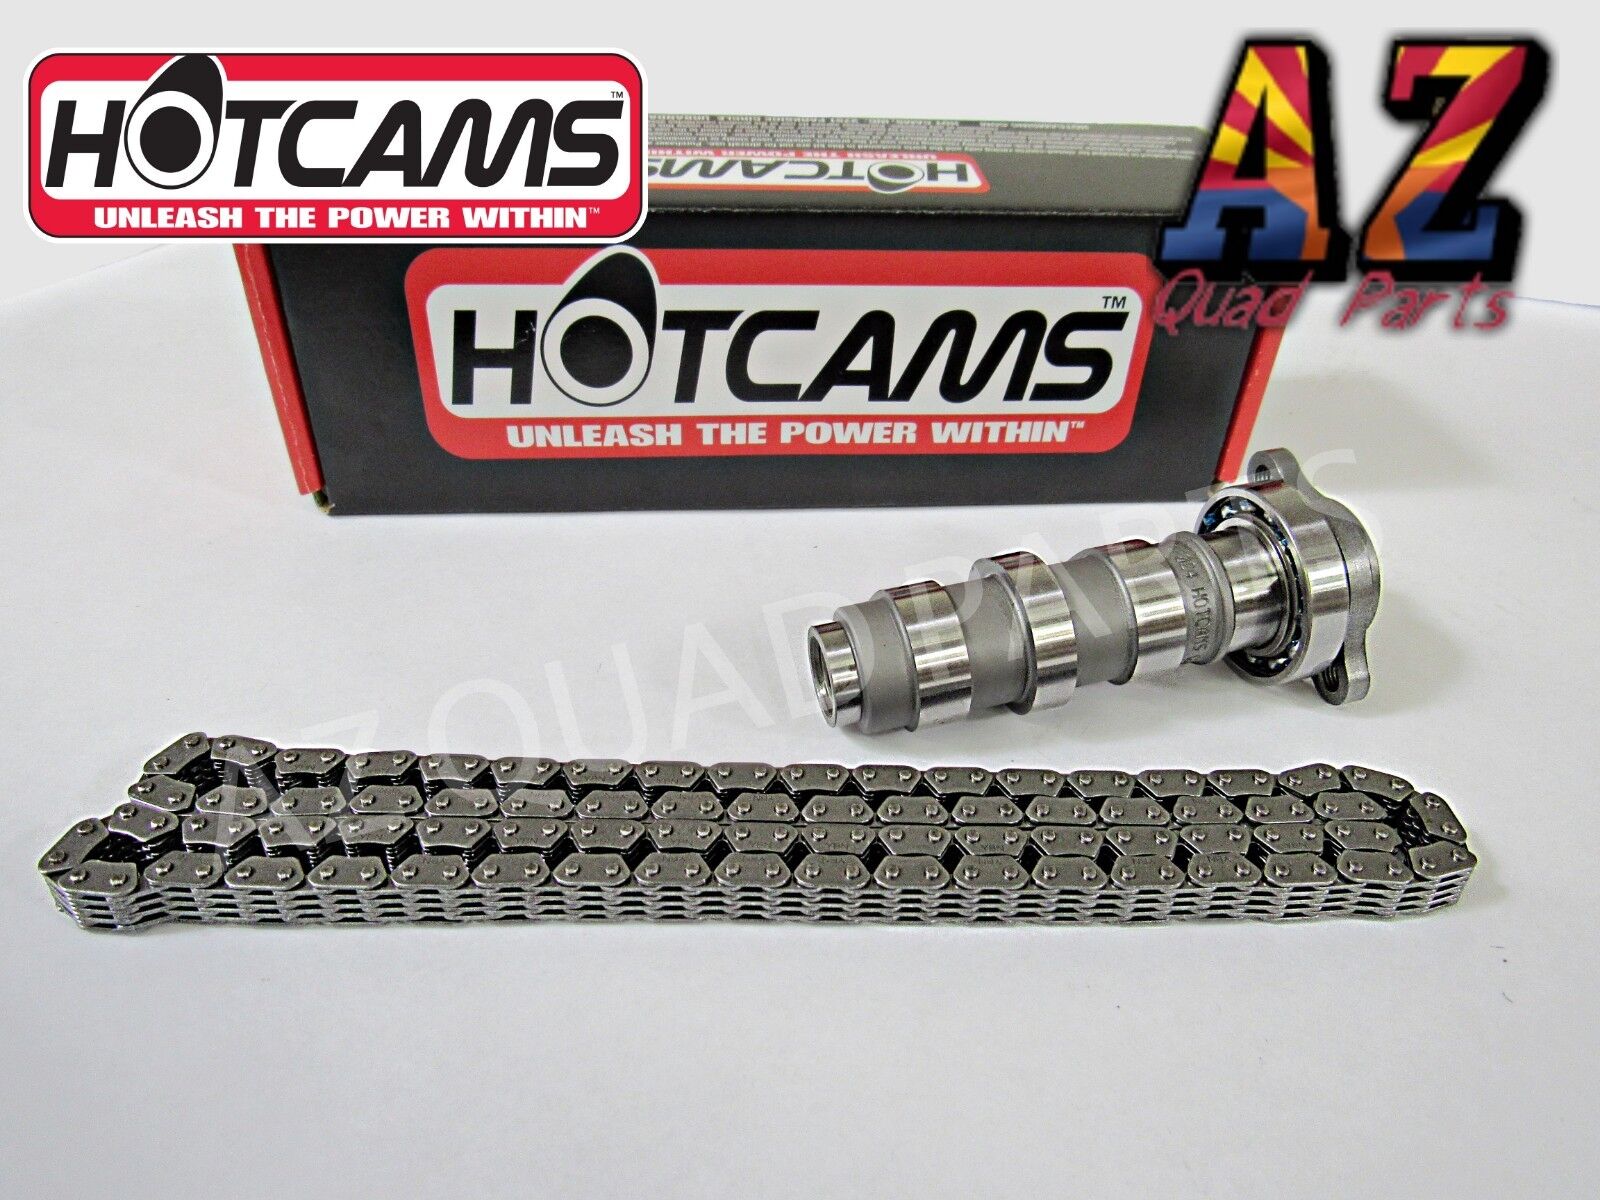 01-05 Yamaha Raptor 660 YFM660 Hotcams Hot Cam Stage 1 One Camshaft Timing Chain